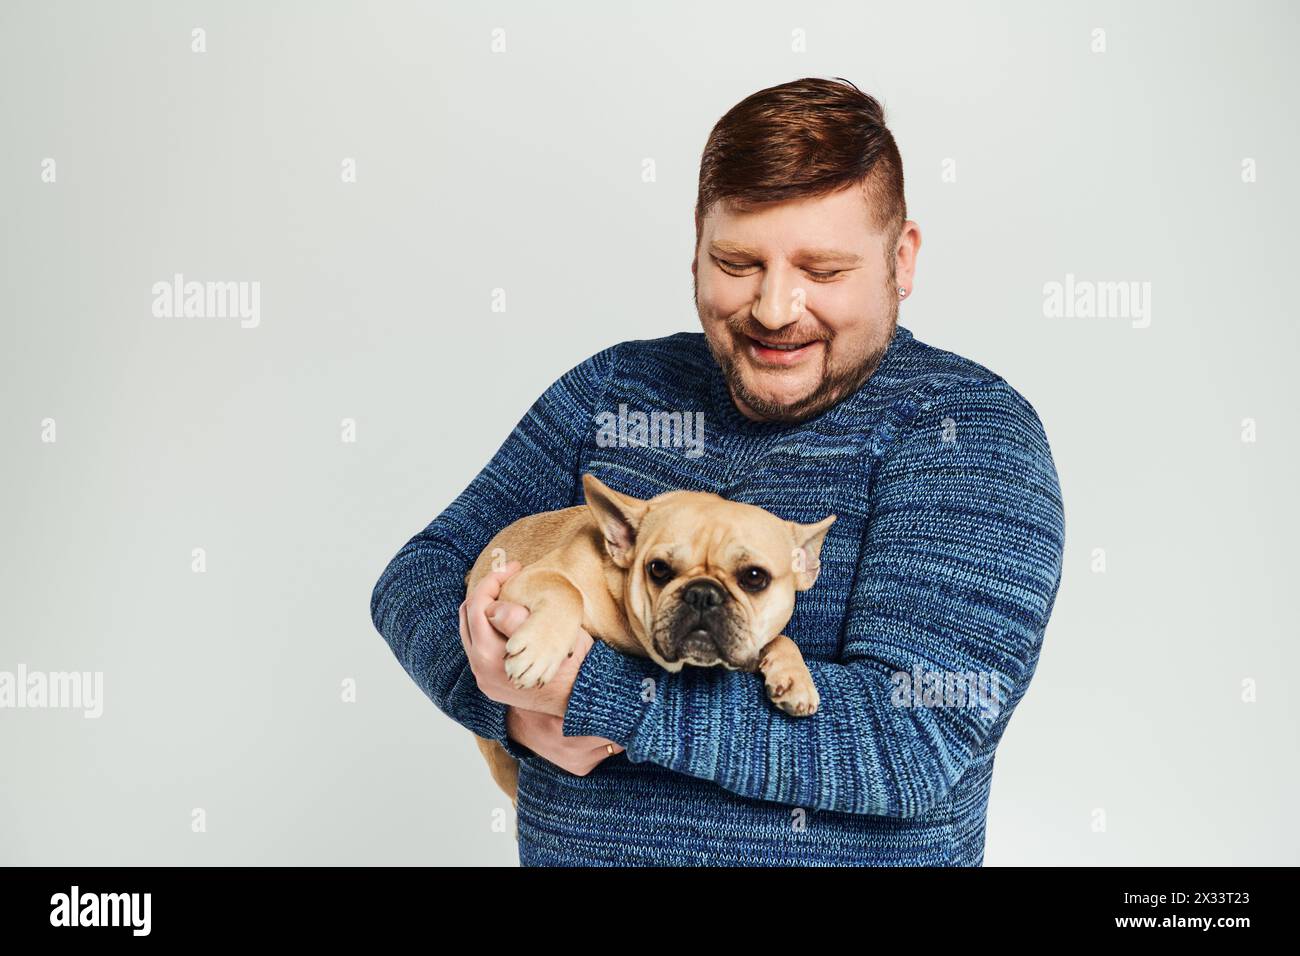 A man cradling a small dog tenderly in his arms. Stock Photo